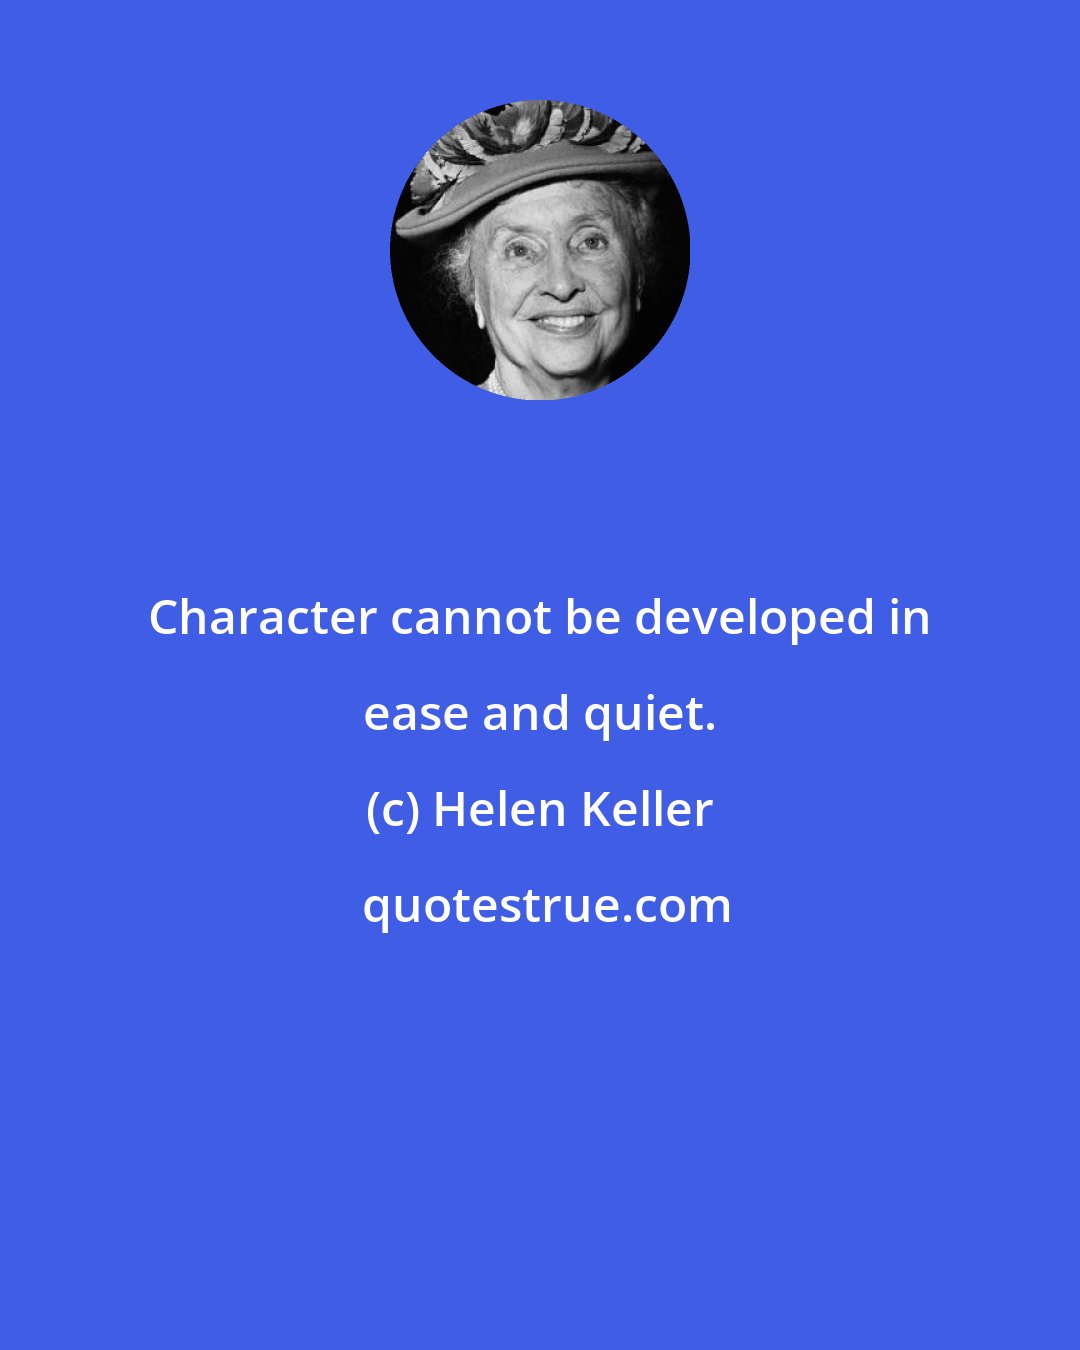 Helen Keller: Character cannot be developed in ease and quiet.